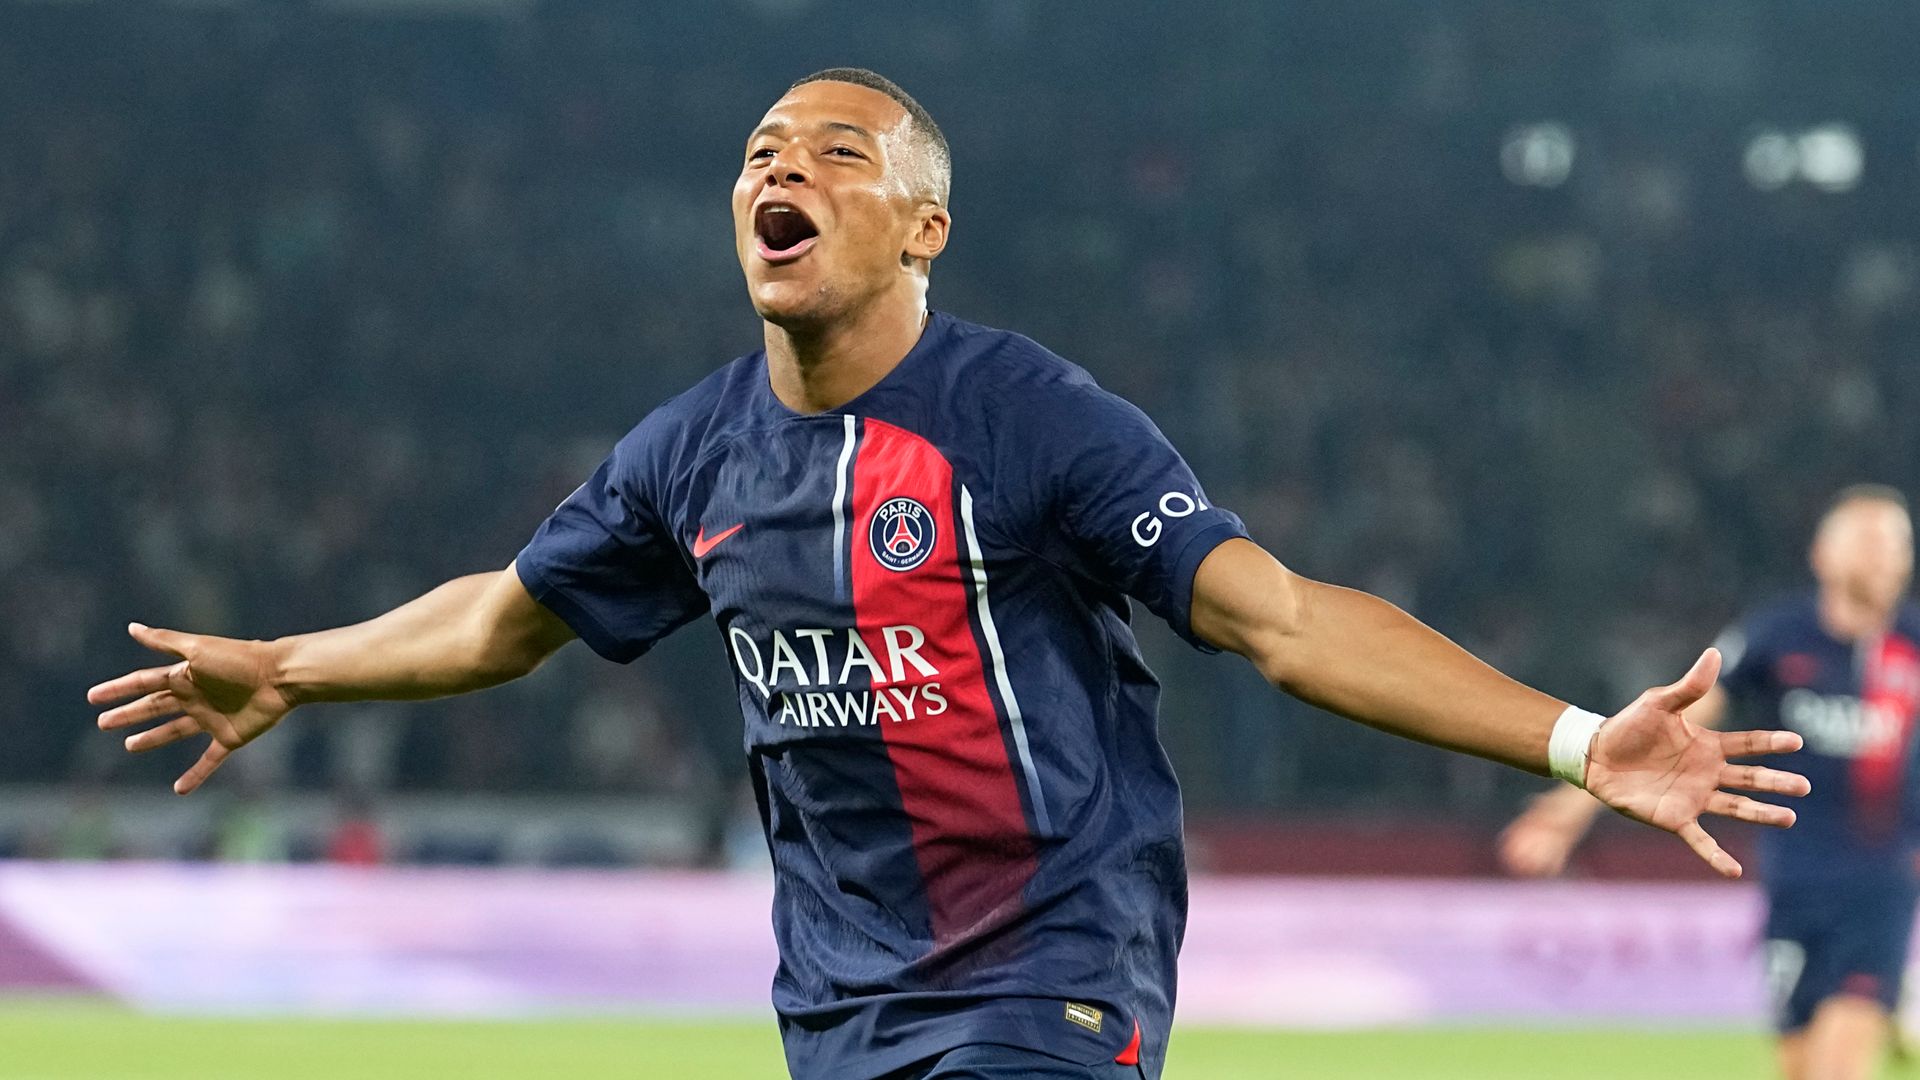 Mbappe to leave PSG this summer